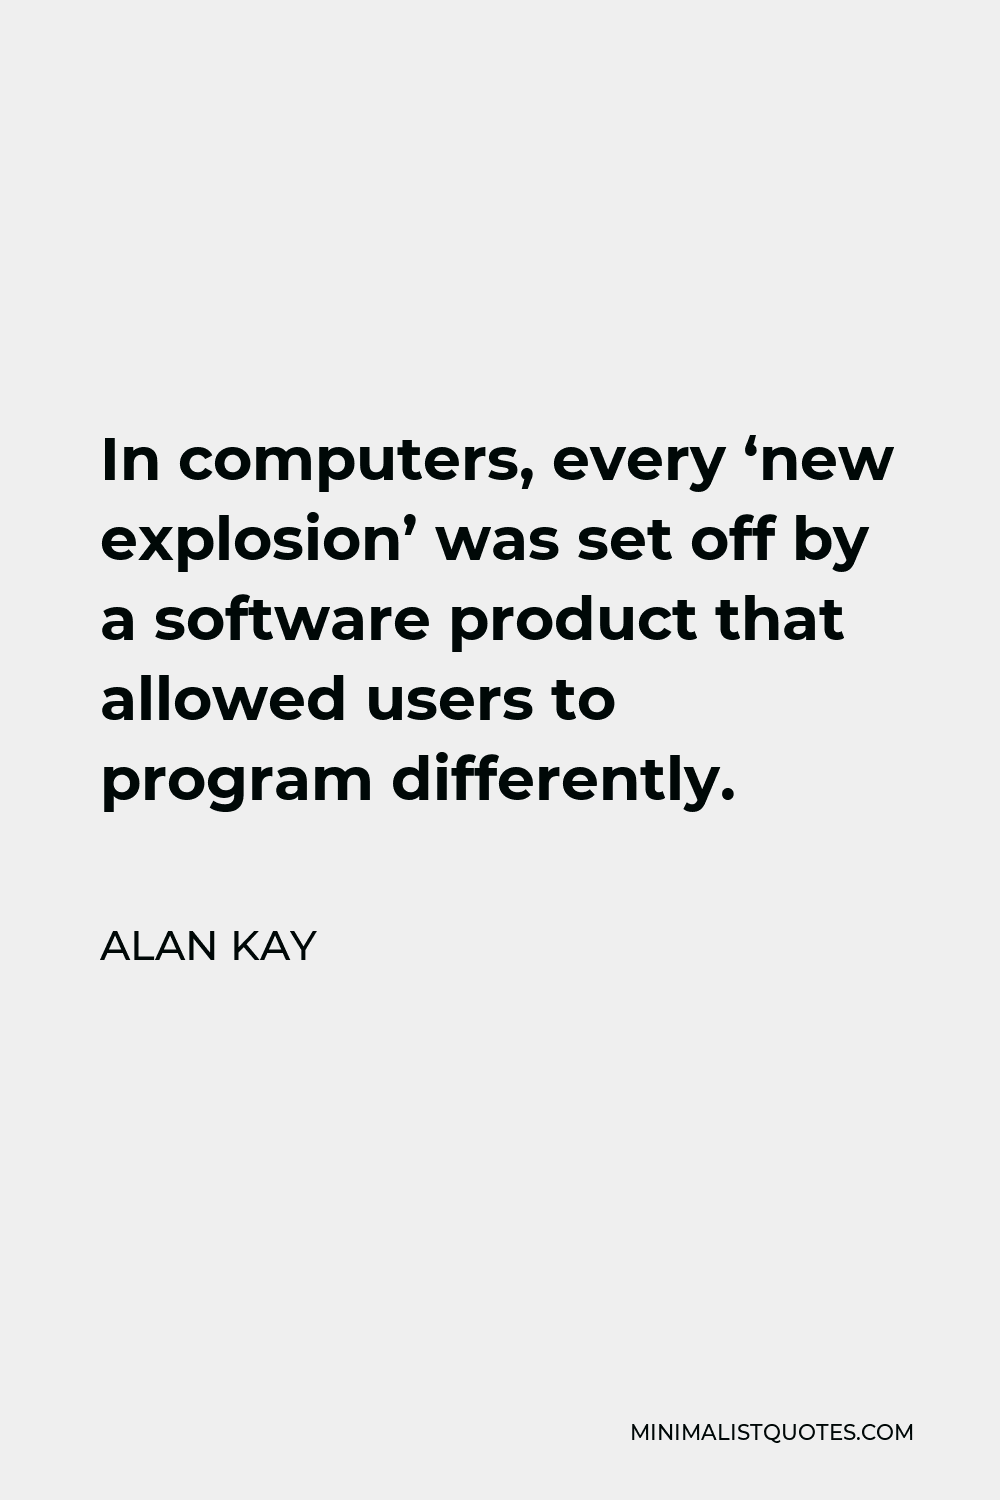 Alan Kay Quote - In computers, every ‘new explosion’ was set off by a software product that allowed users to program differently.